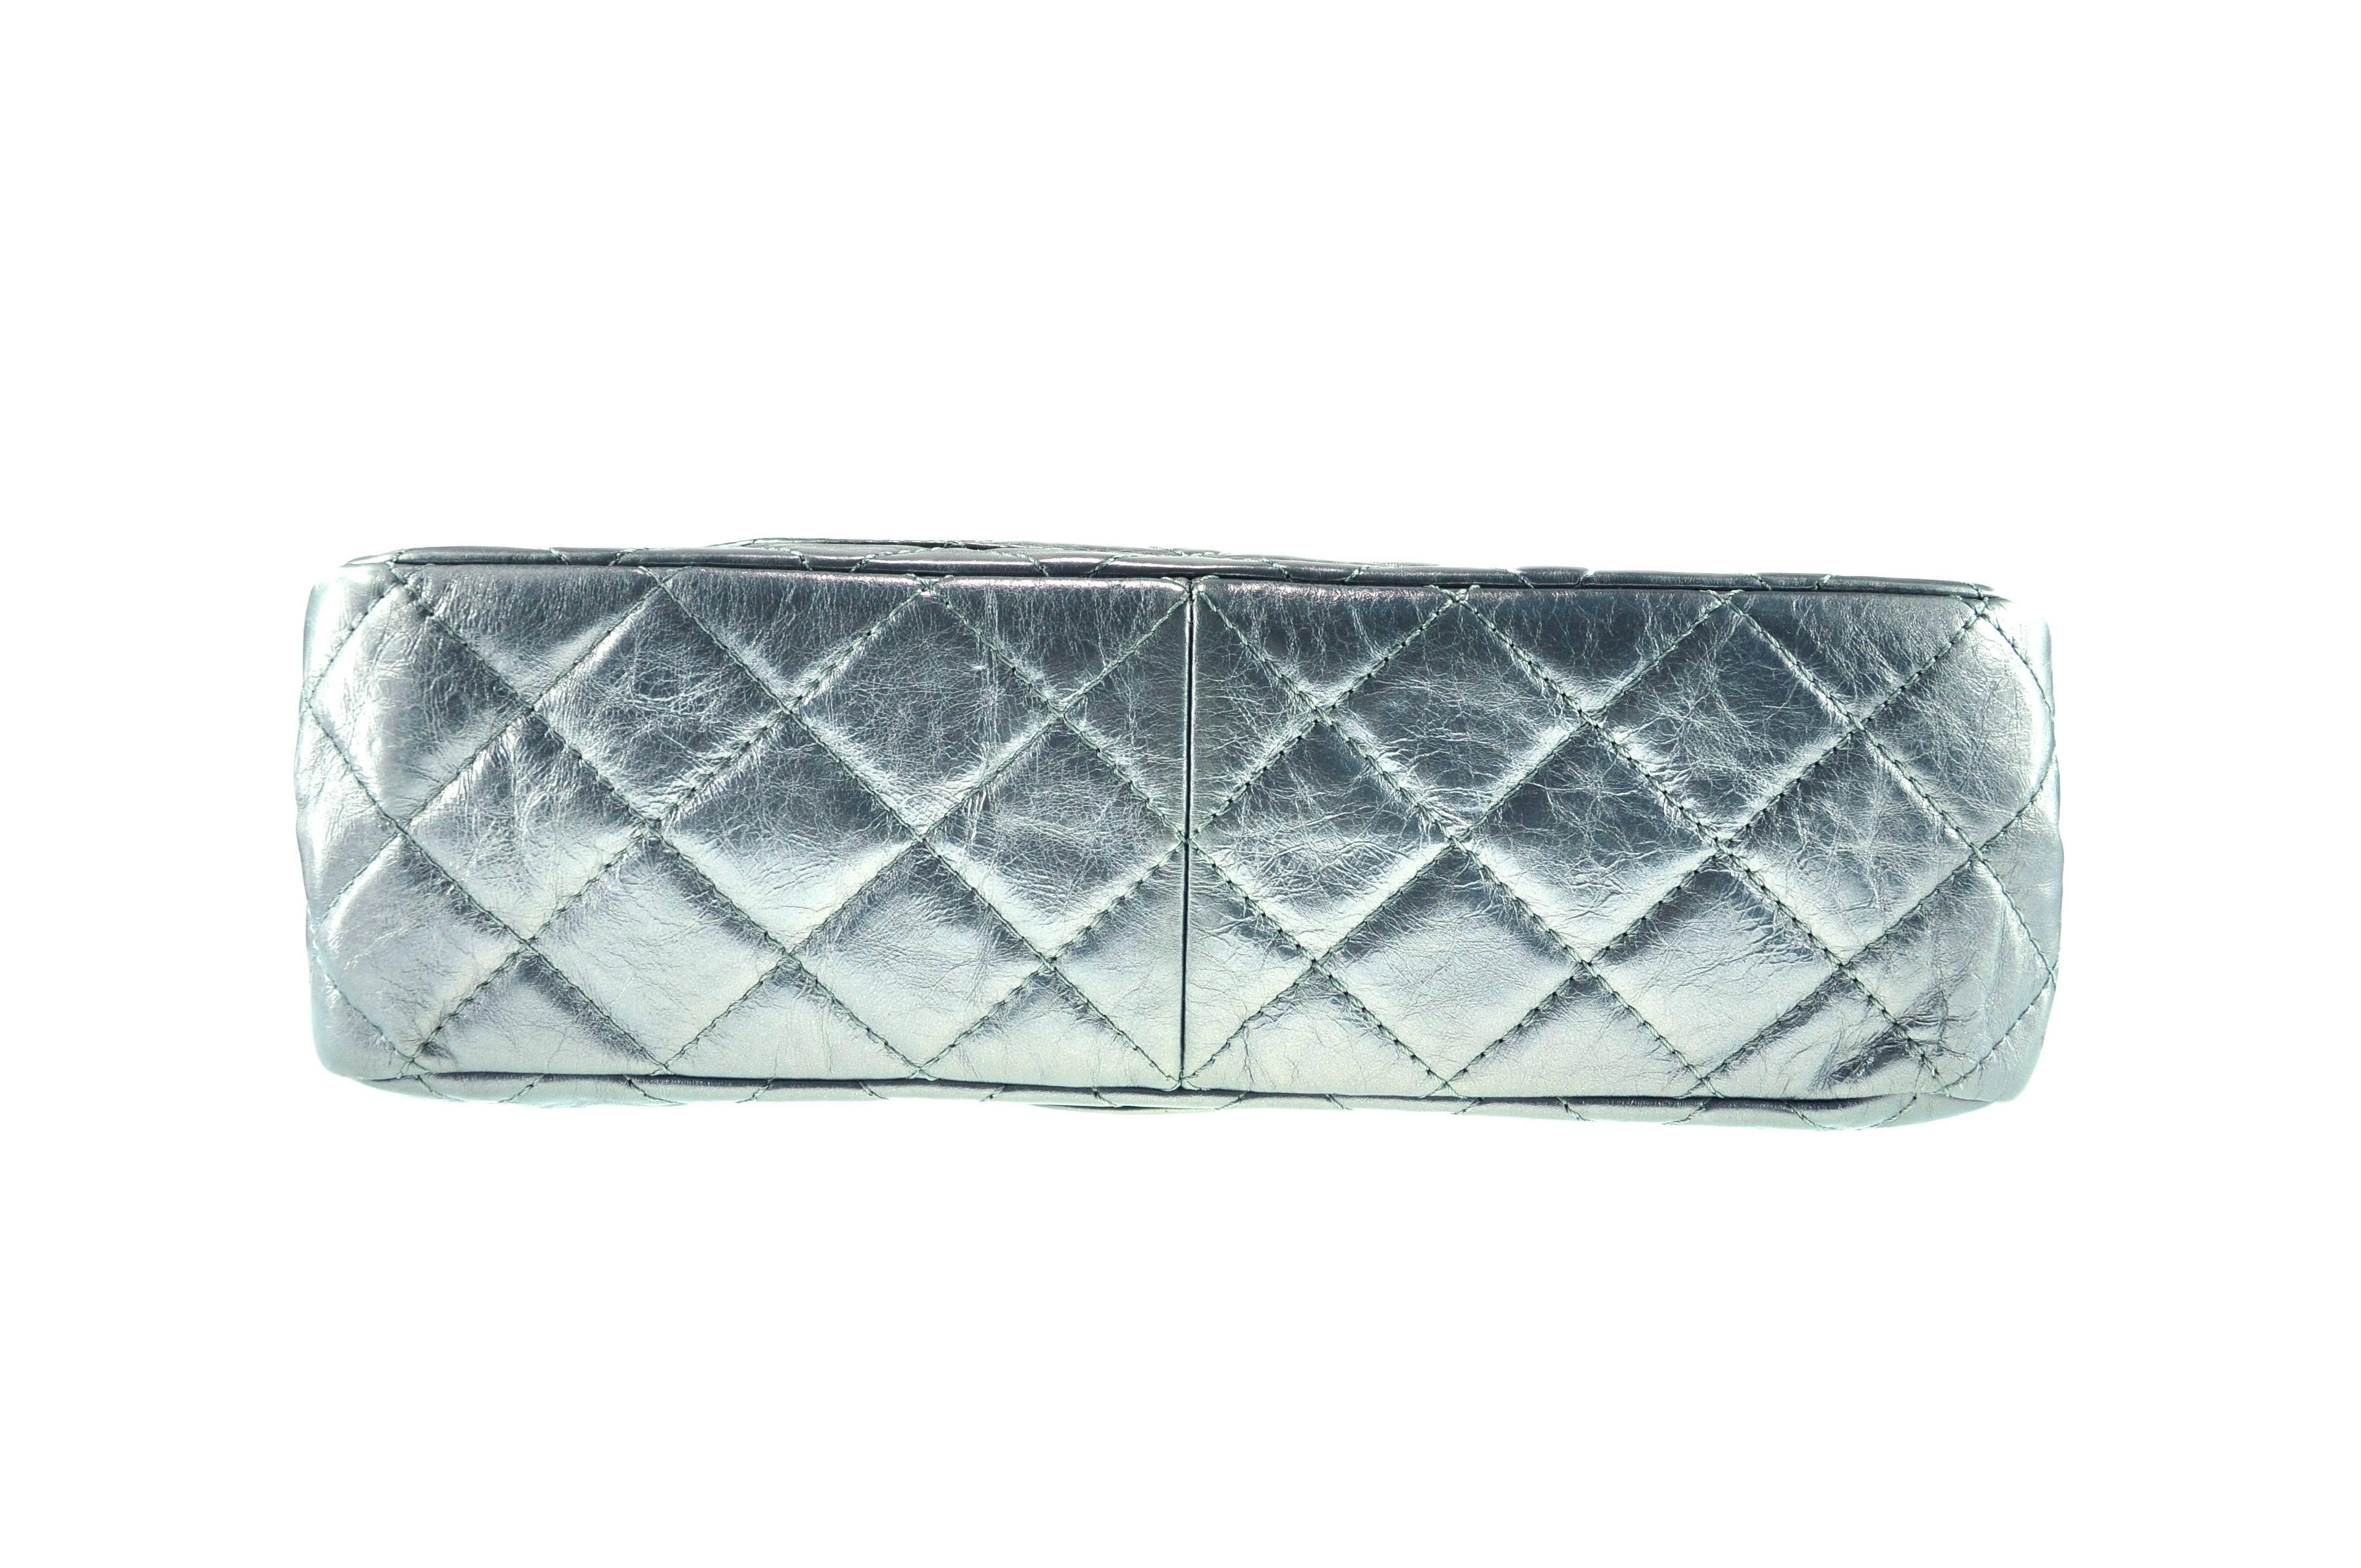 Chanel 2.55 Re-issue Metallic Silver Grey Jumbo Double Flap Leather Bag 2